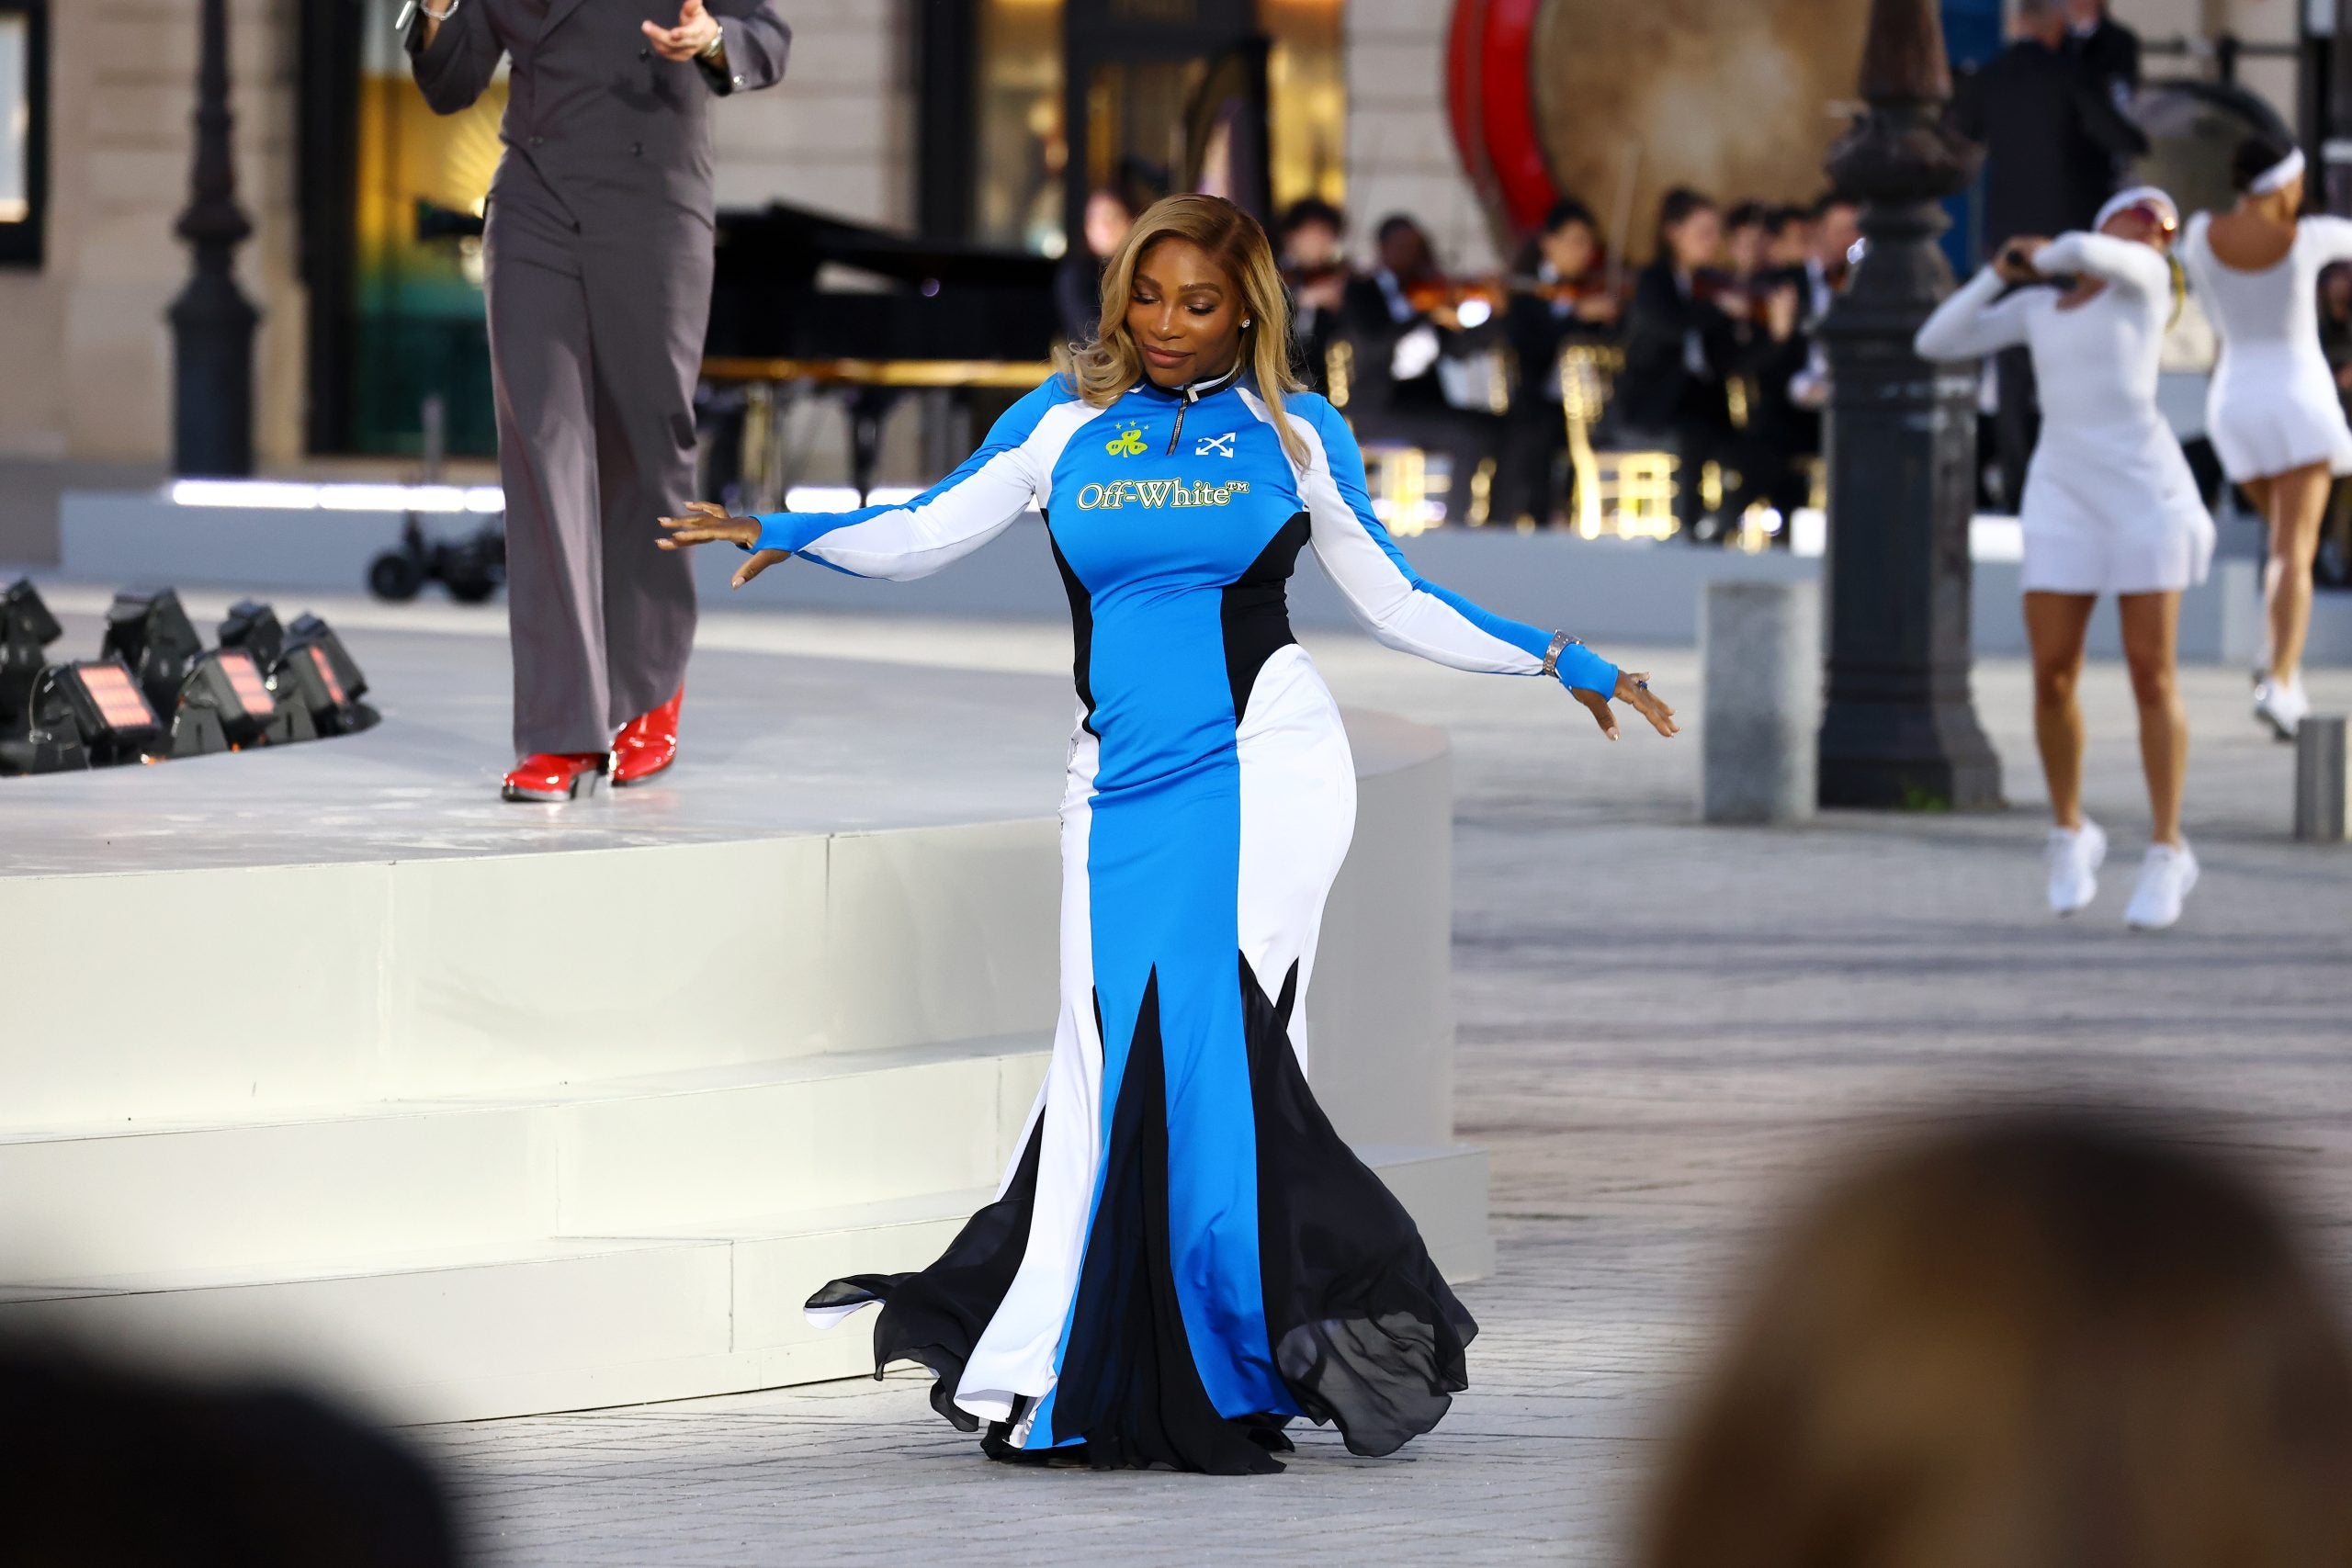 In Case You Missed It: Serena Williams’s Runway Walk, A$AP Rocky’s Fashion Week Debut, And More